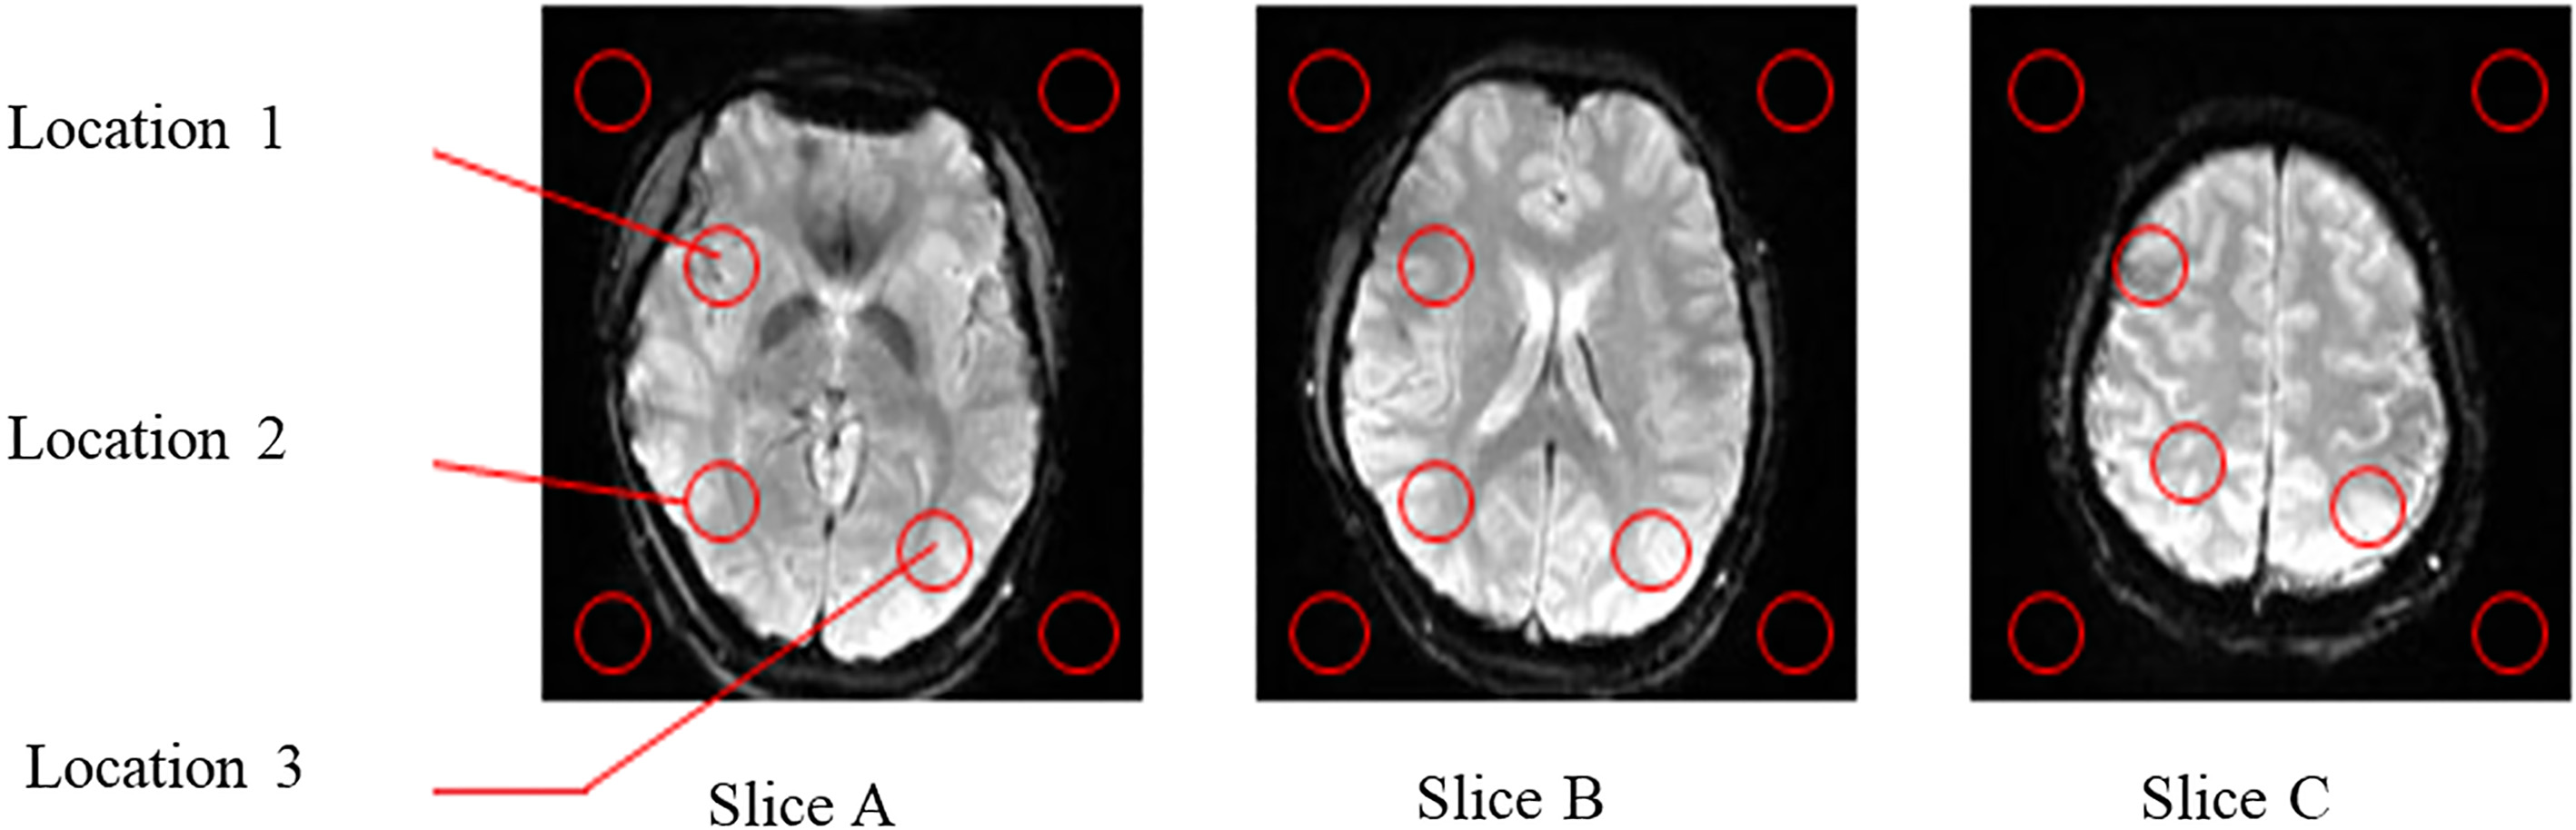 MR brain images of slices A, B, and C.